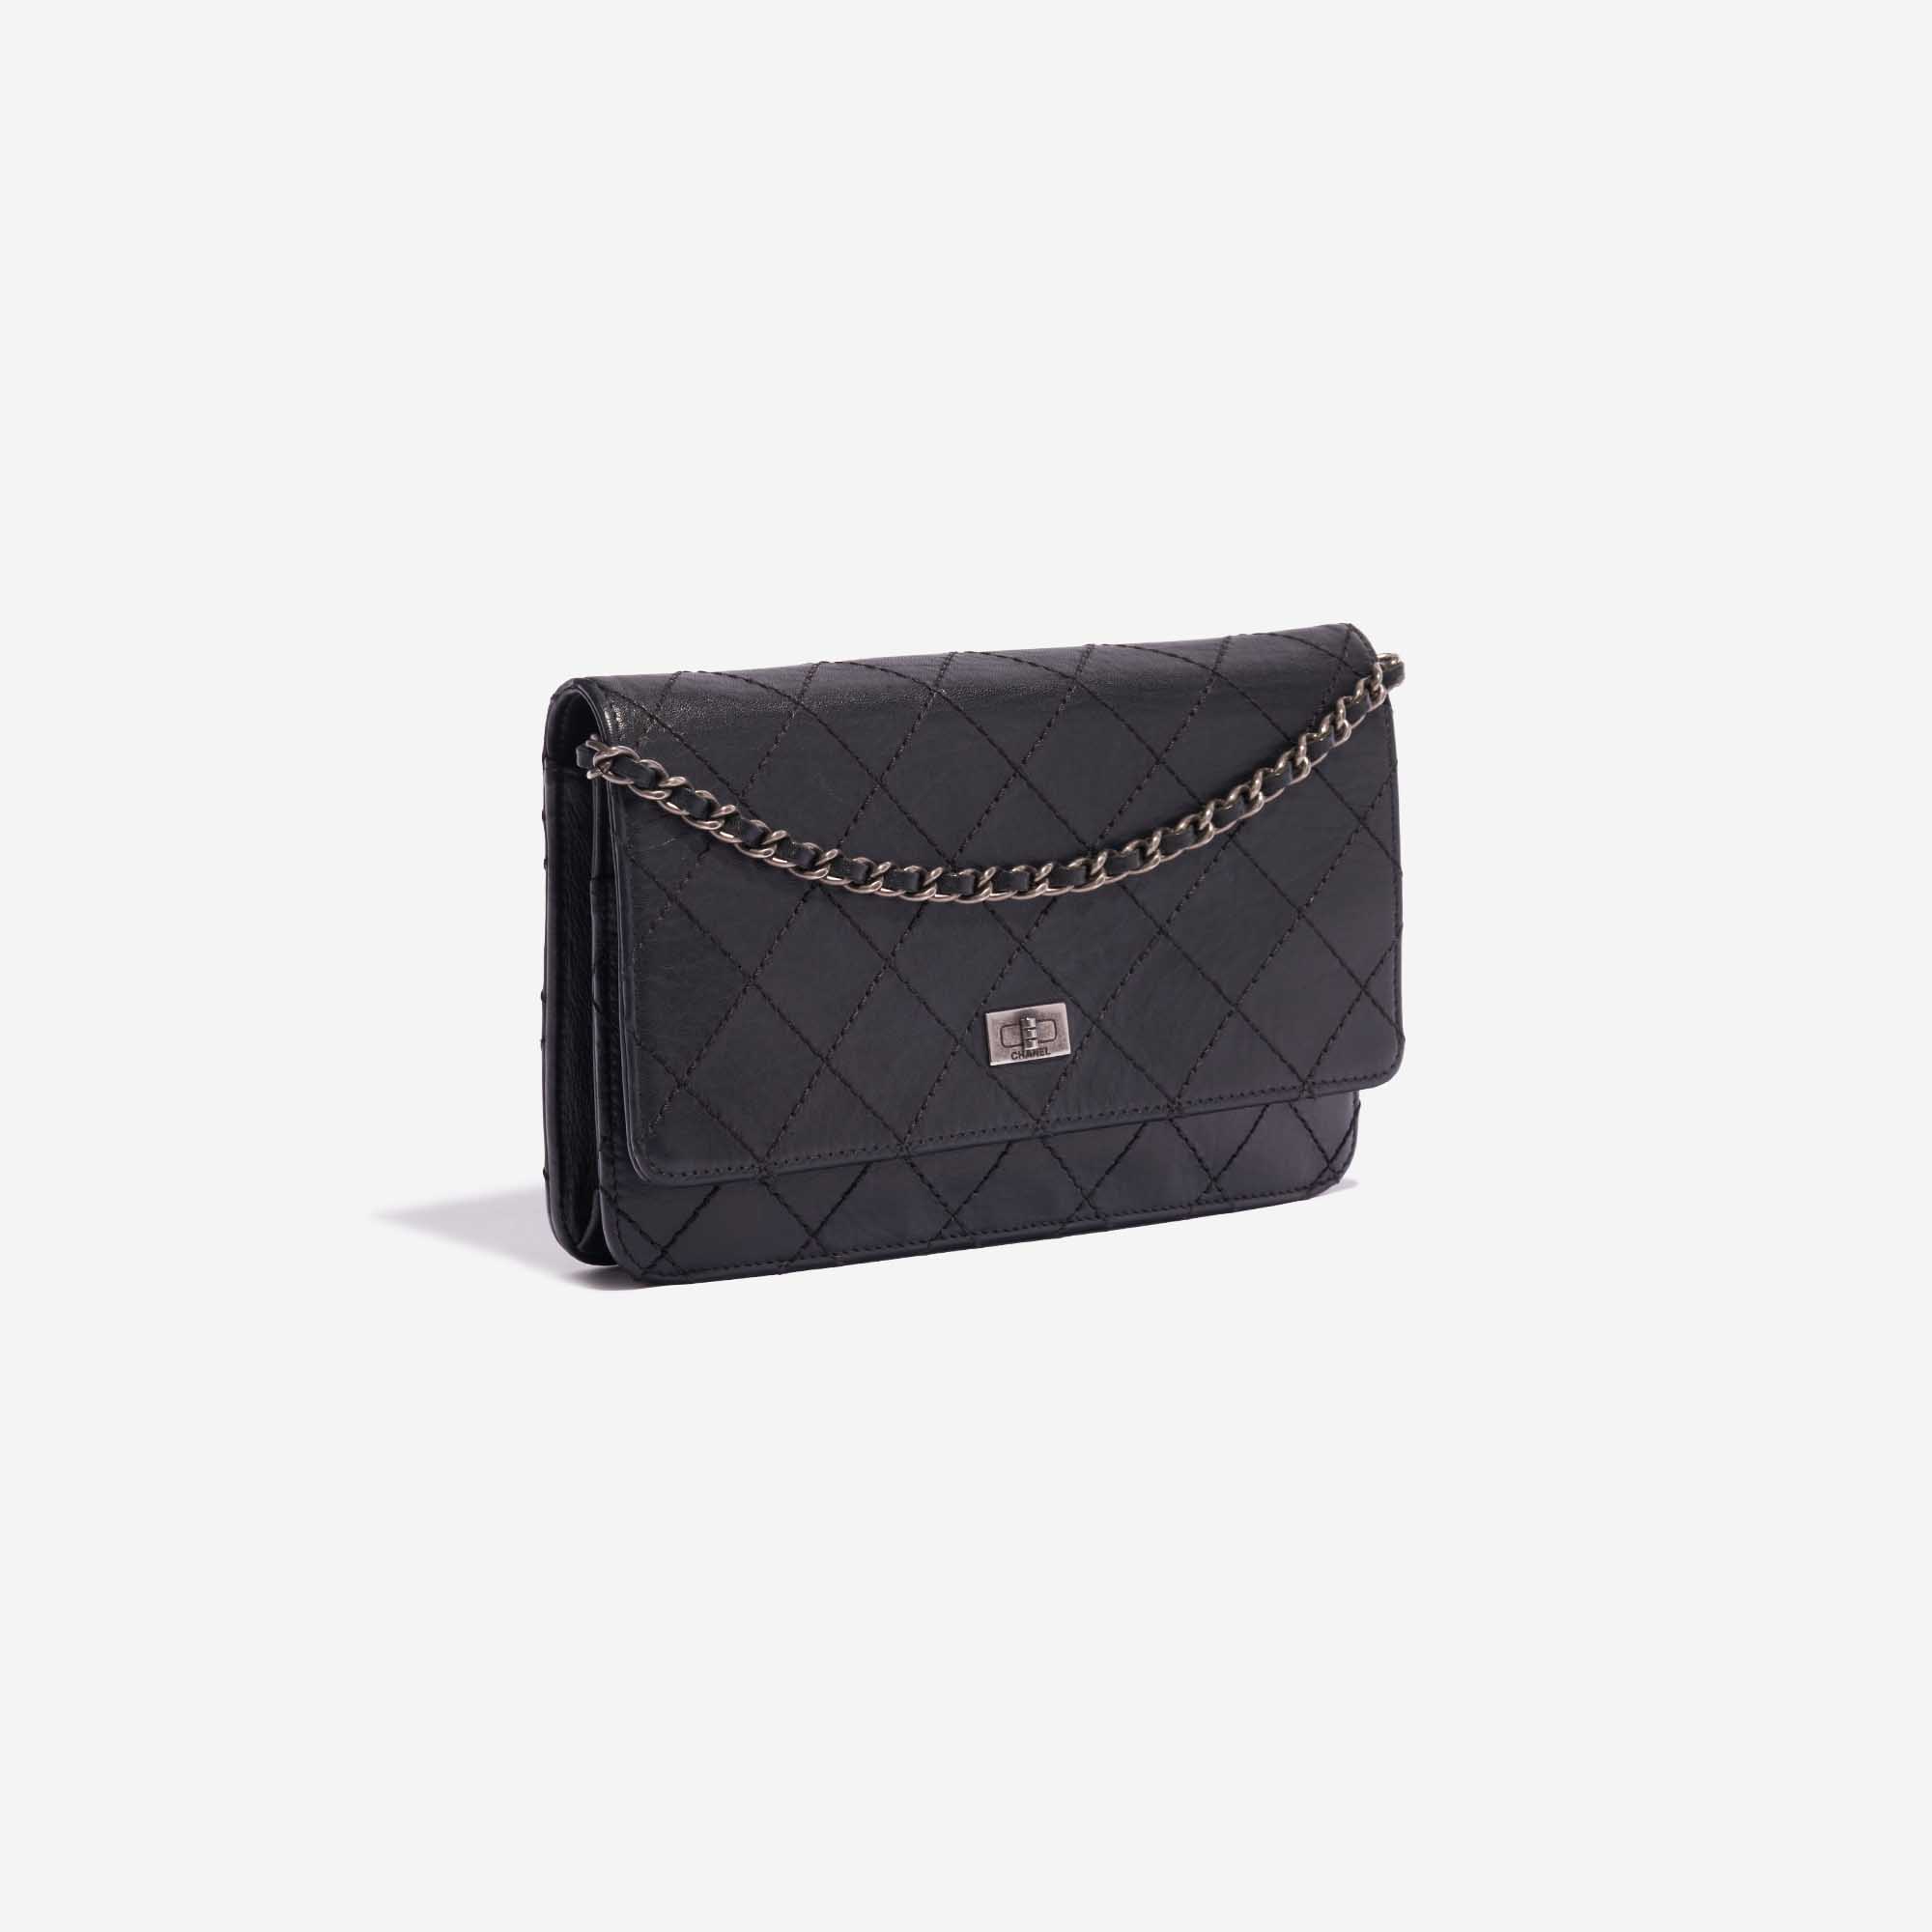 Pre-owned Chanel bag Reissue WOC Lamb Black Black Side Front | Sell your designer bag on Saclab.com